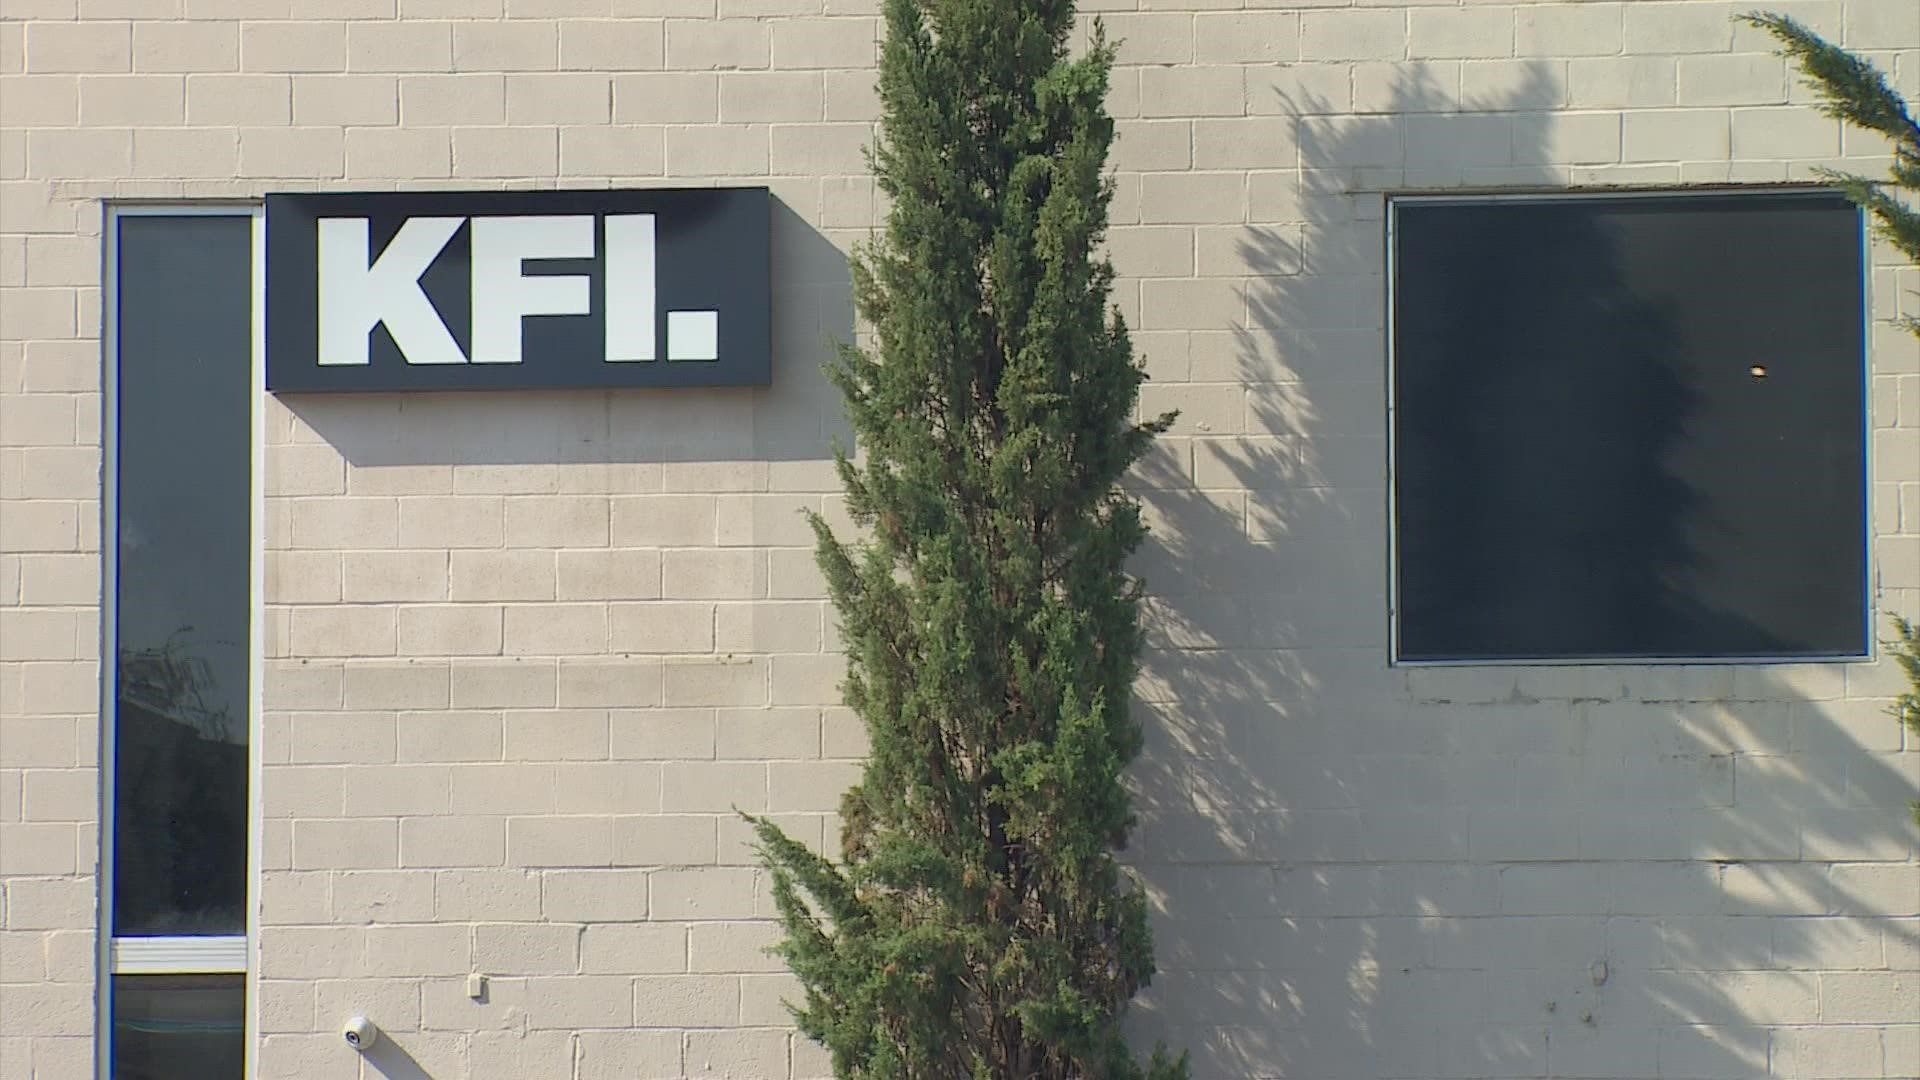 KFI Studios and 8 other places were raided by the DEA and Dallas Police Thursday morning. They say it's part of a large scale narcotics investigation.